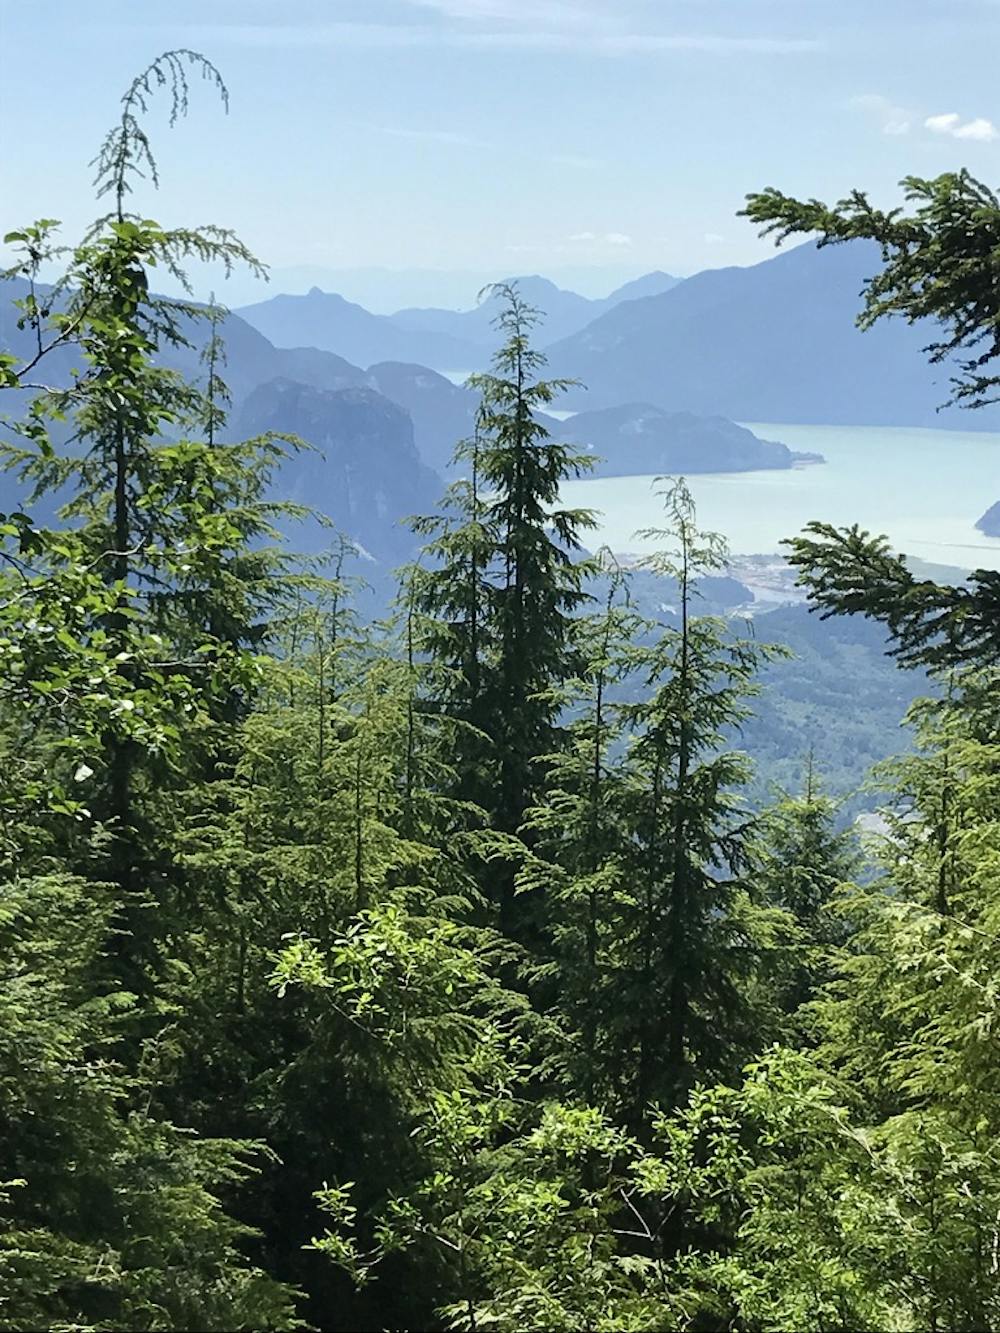 Looking back towards the Howe Sound